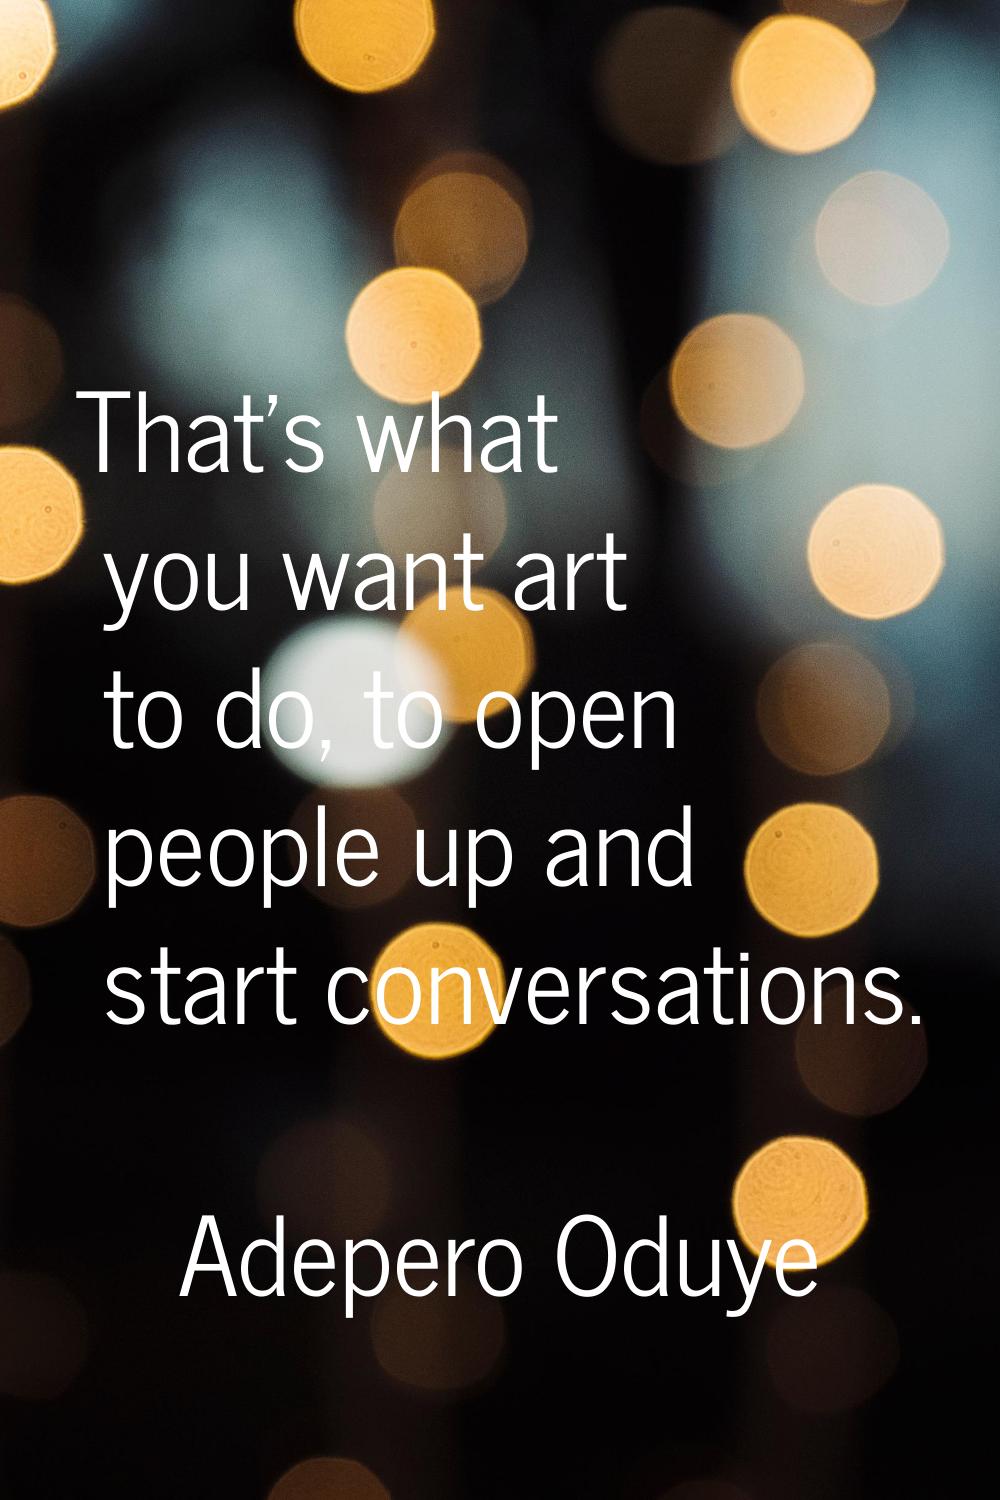 That's what you want art to do, to open people up and start conversations.